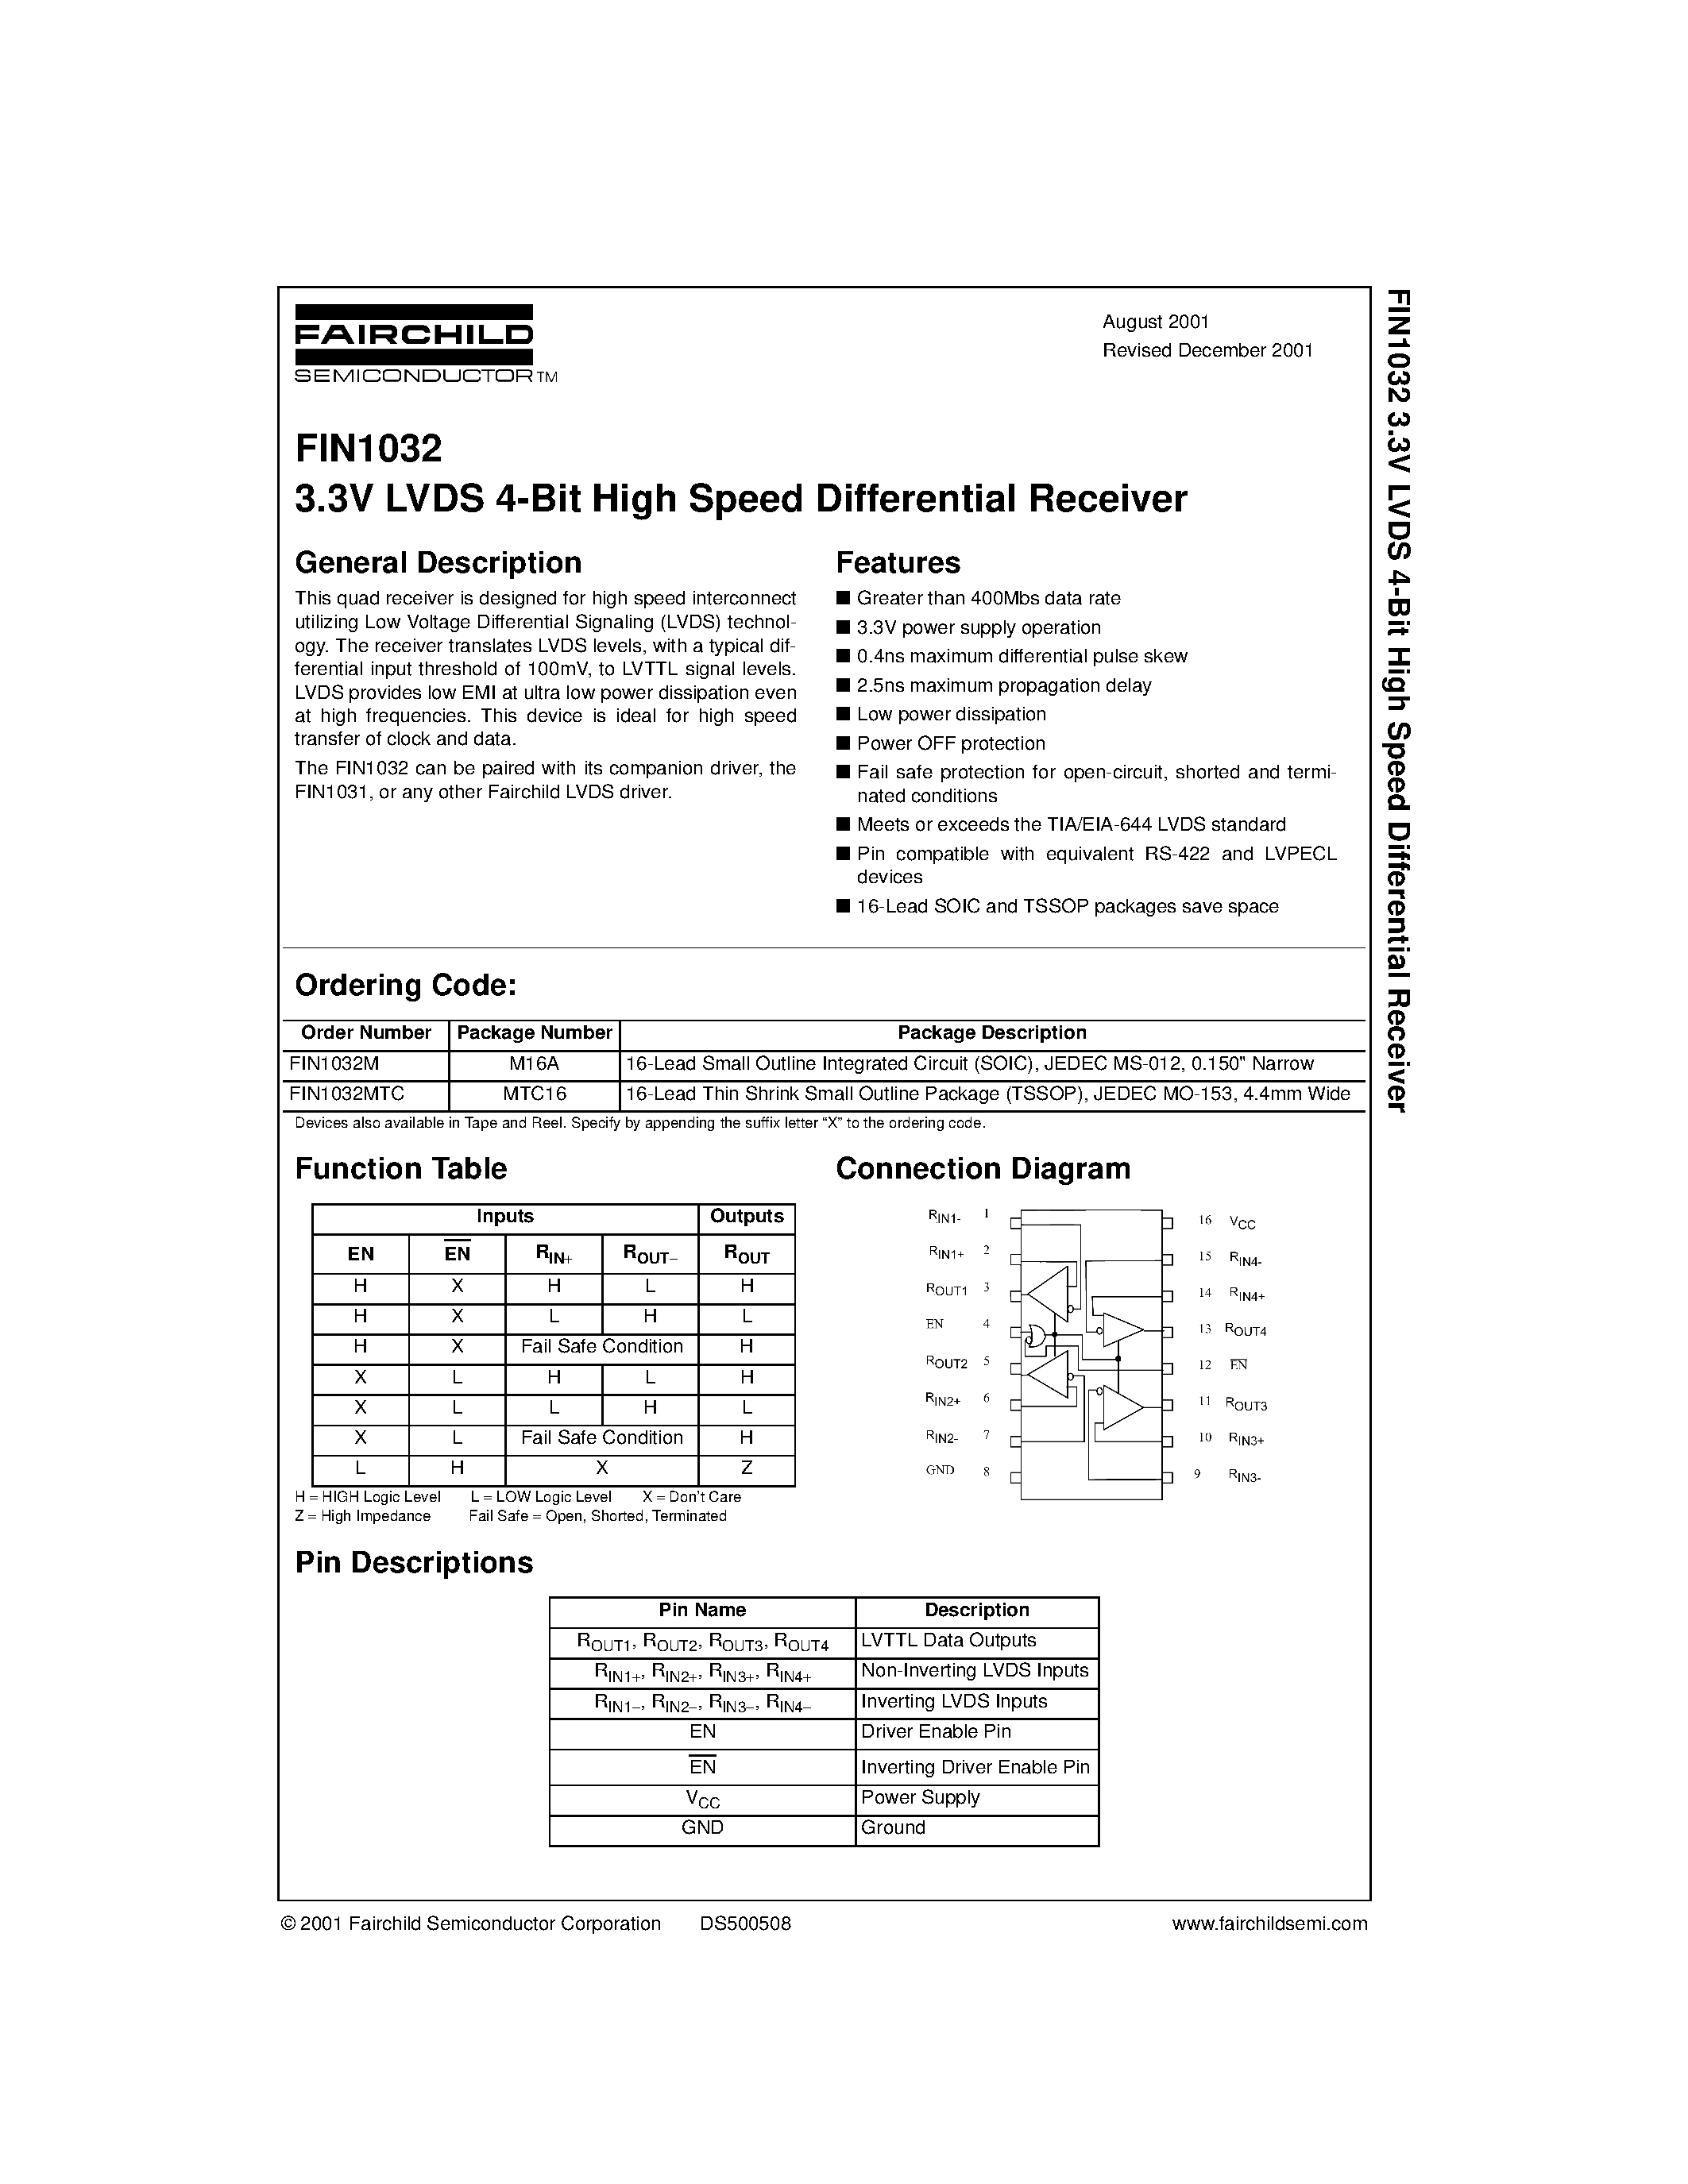 Datasheet FIN1032 - 3.3V LVDS 4-Bit High Speed Differential Receiver page 1